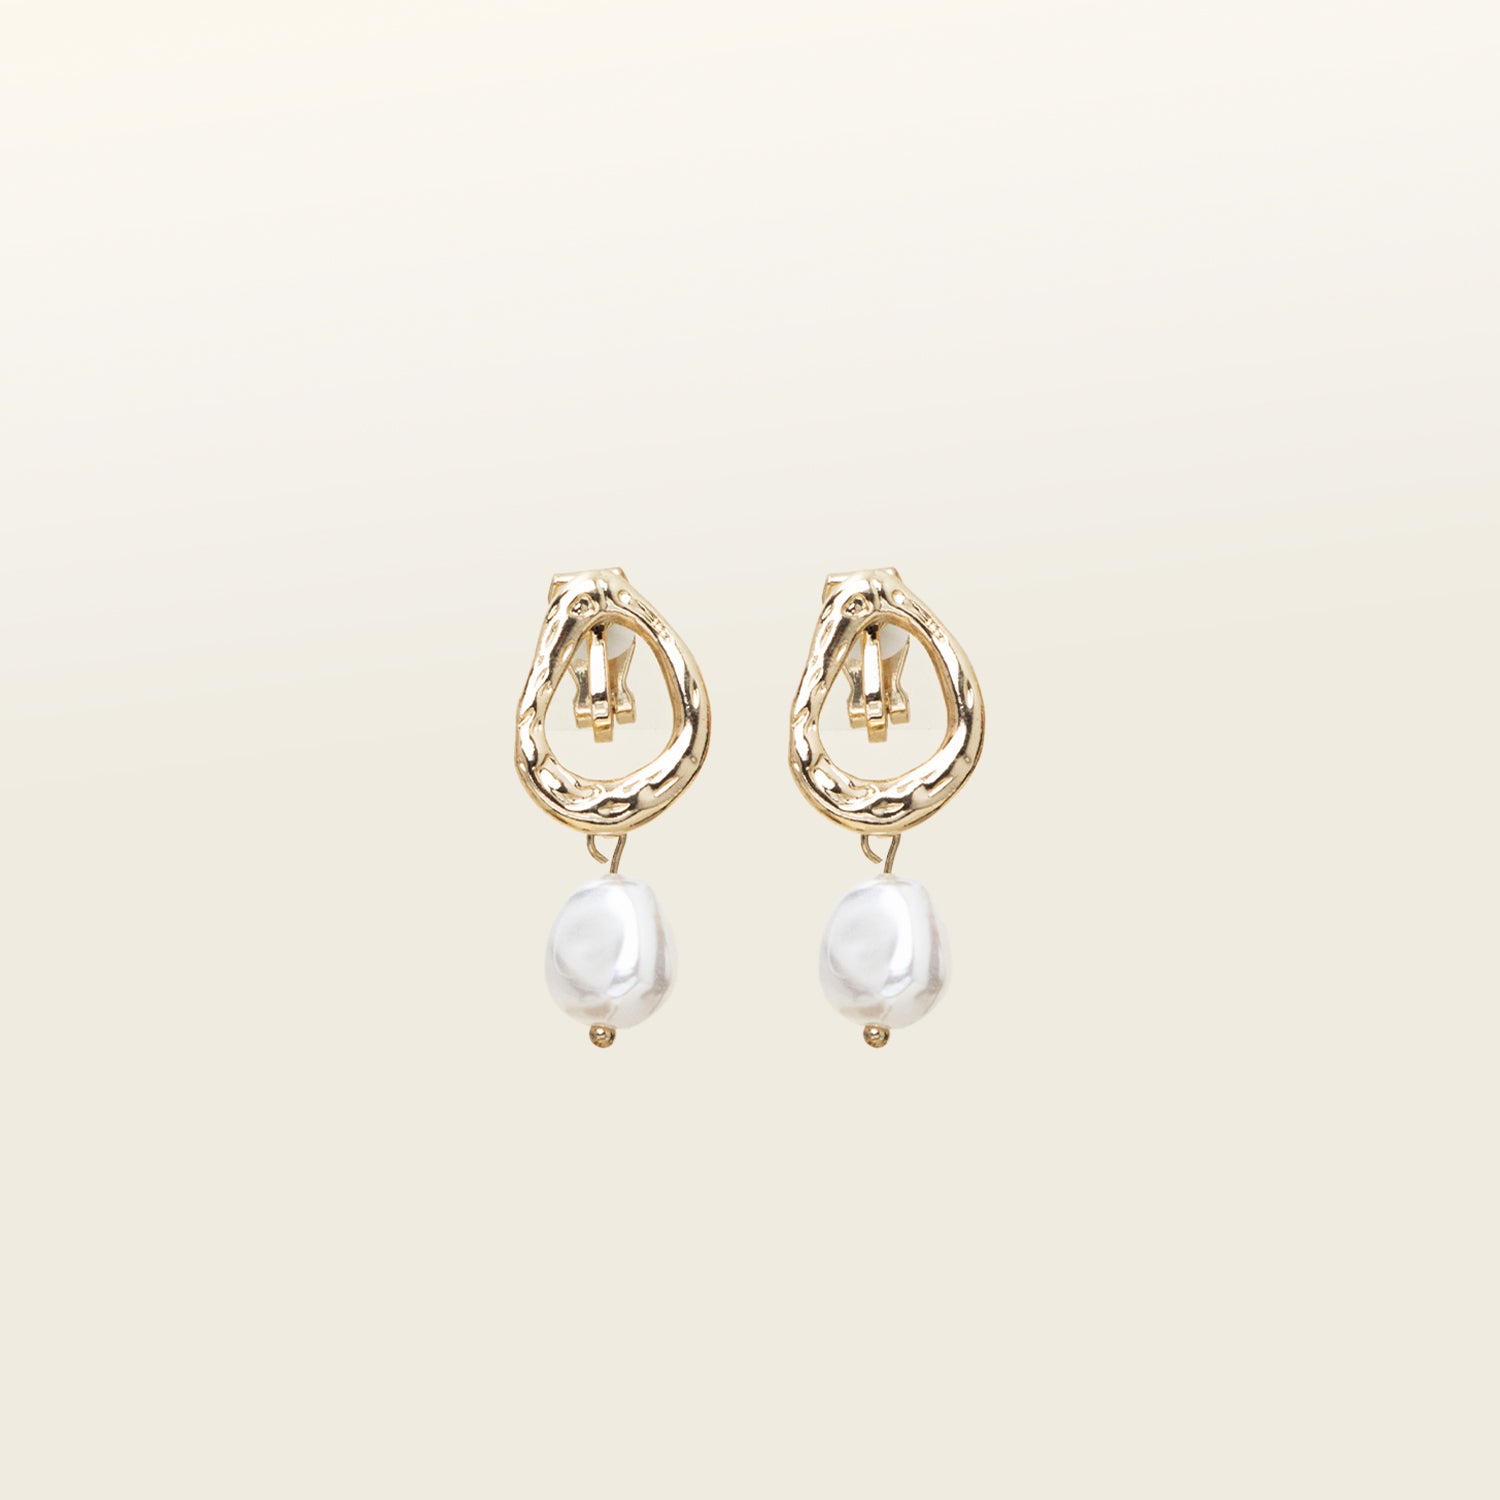 Image of the Ella Pearl Clip-On Earrings provide a secure fit for all ear types, including thick/large ears, sensitive ears, small/thin ears, and stretched/healing ears. Enjoy comfortable wear of up to 12 hours without needing to make any adjustments. Crafted with gold tone plated zinc alloy and a faux pearl, each earring has a removable rubber padding for a snug fit. Please note that the item is sold as one pair.